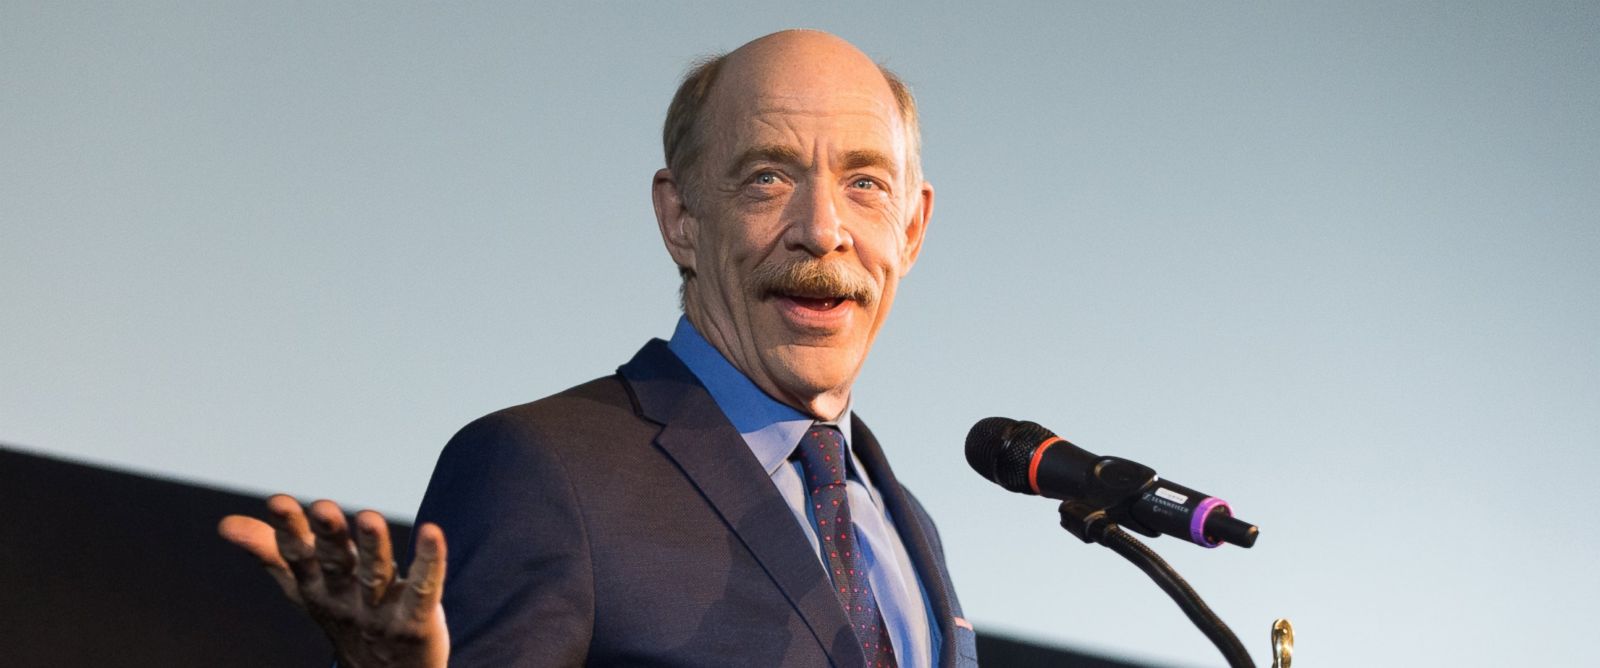 JK Simmons Is Getting Ripped for His New Movie - ABC News